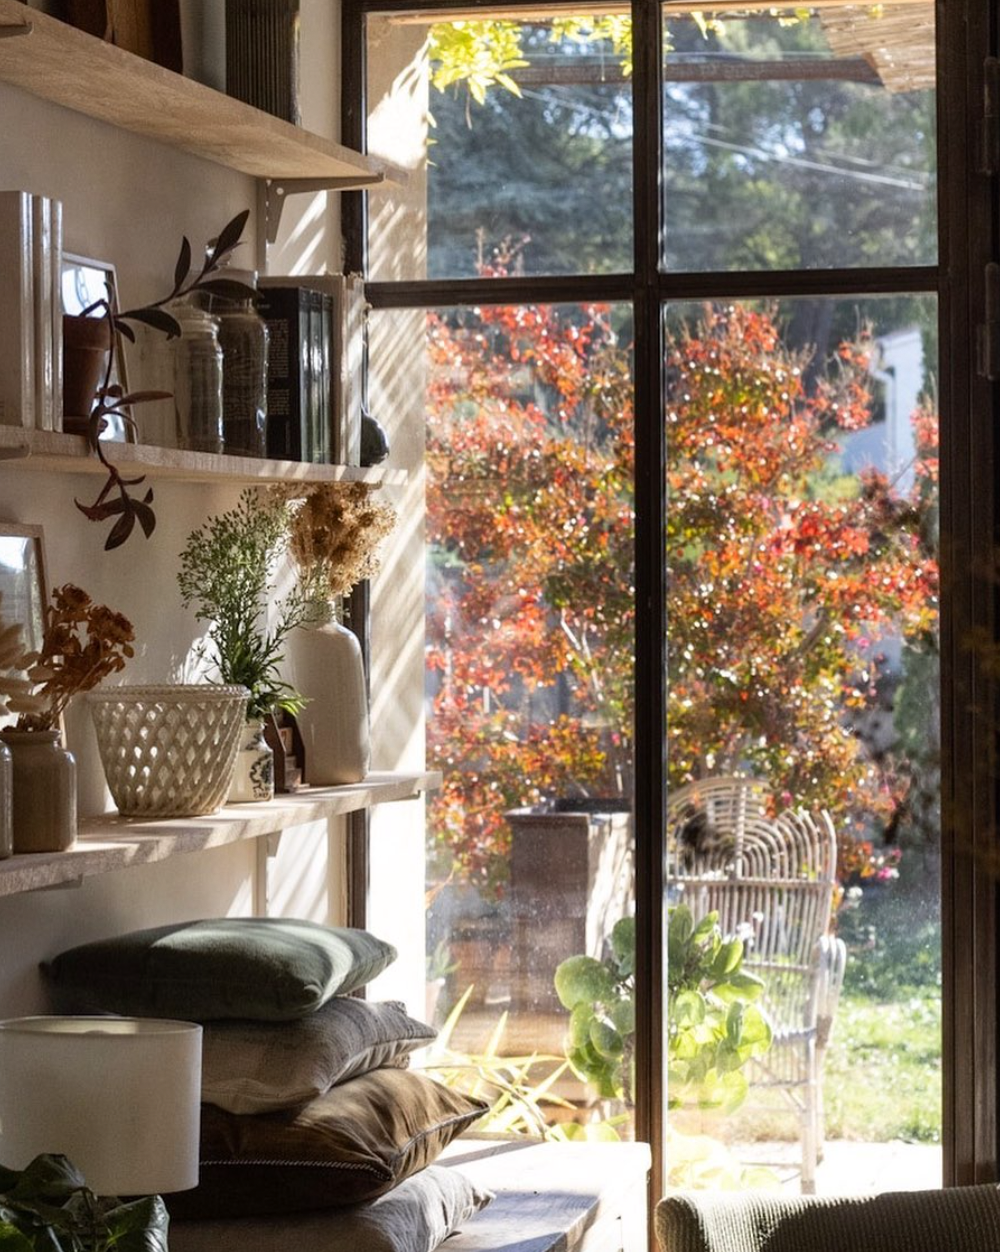 shelving displaying vintage objects next to a window with a view of outdoors. 